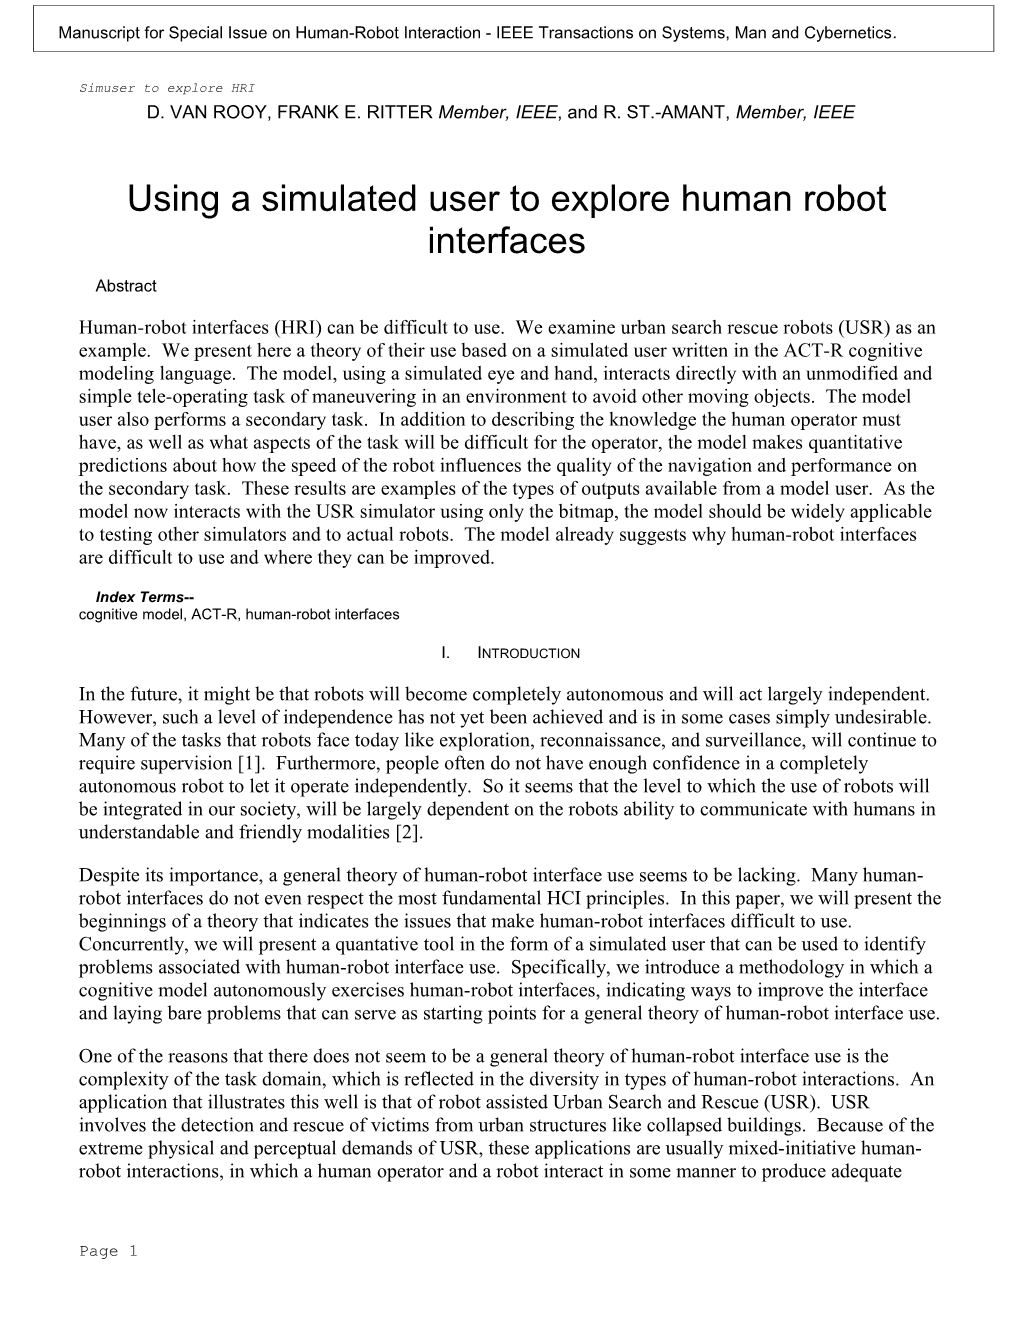 Using a Simulated User to Explore Human Robot Interfaces